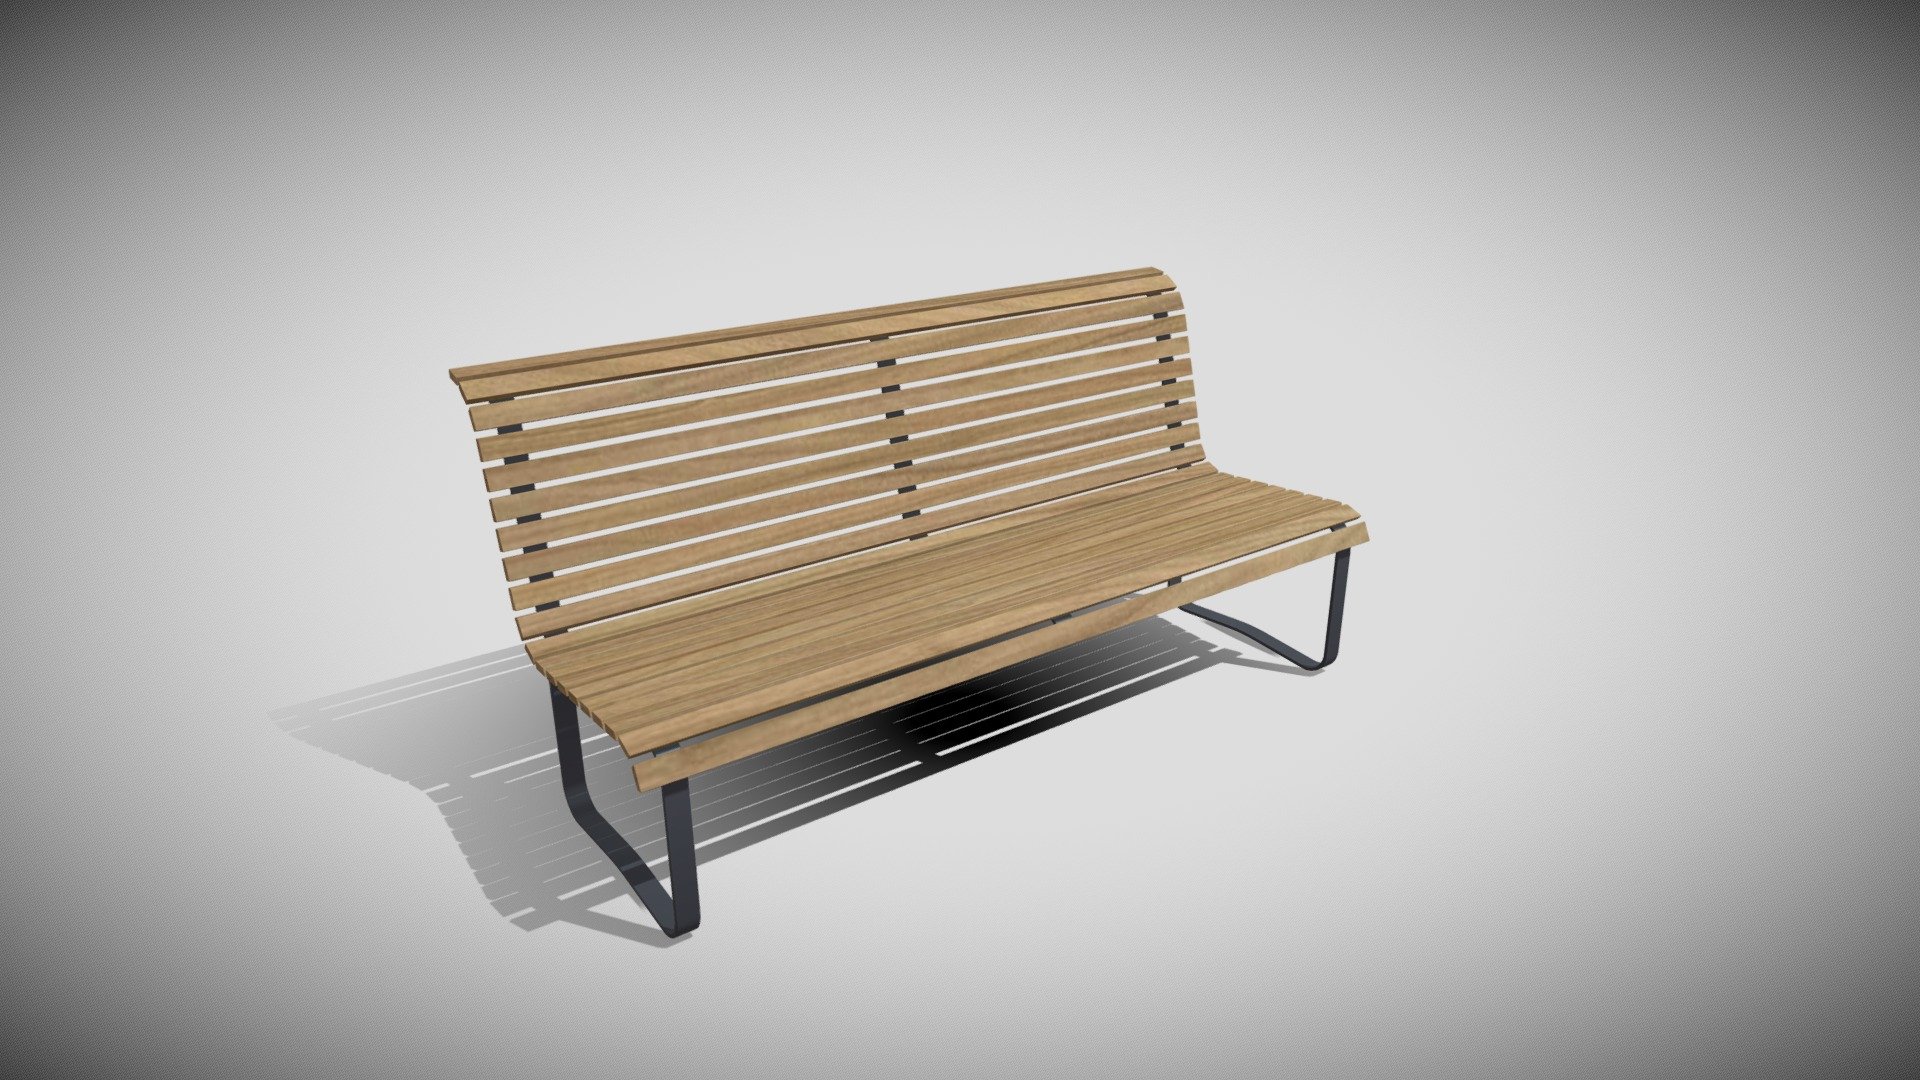 Detailed model of a Park Bench, modeled in Cinema 4D.The model was created using approximate real world dimensions.

The model has 17,948 polys and 17,244 vertices.

An additional file has been provided containing the original Cinema 4D project file, textures and other 3d export files such as 3ds, fbx and obj 3d model